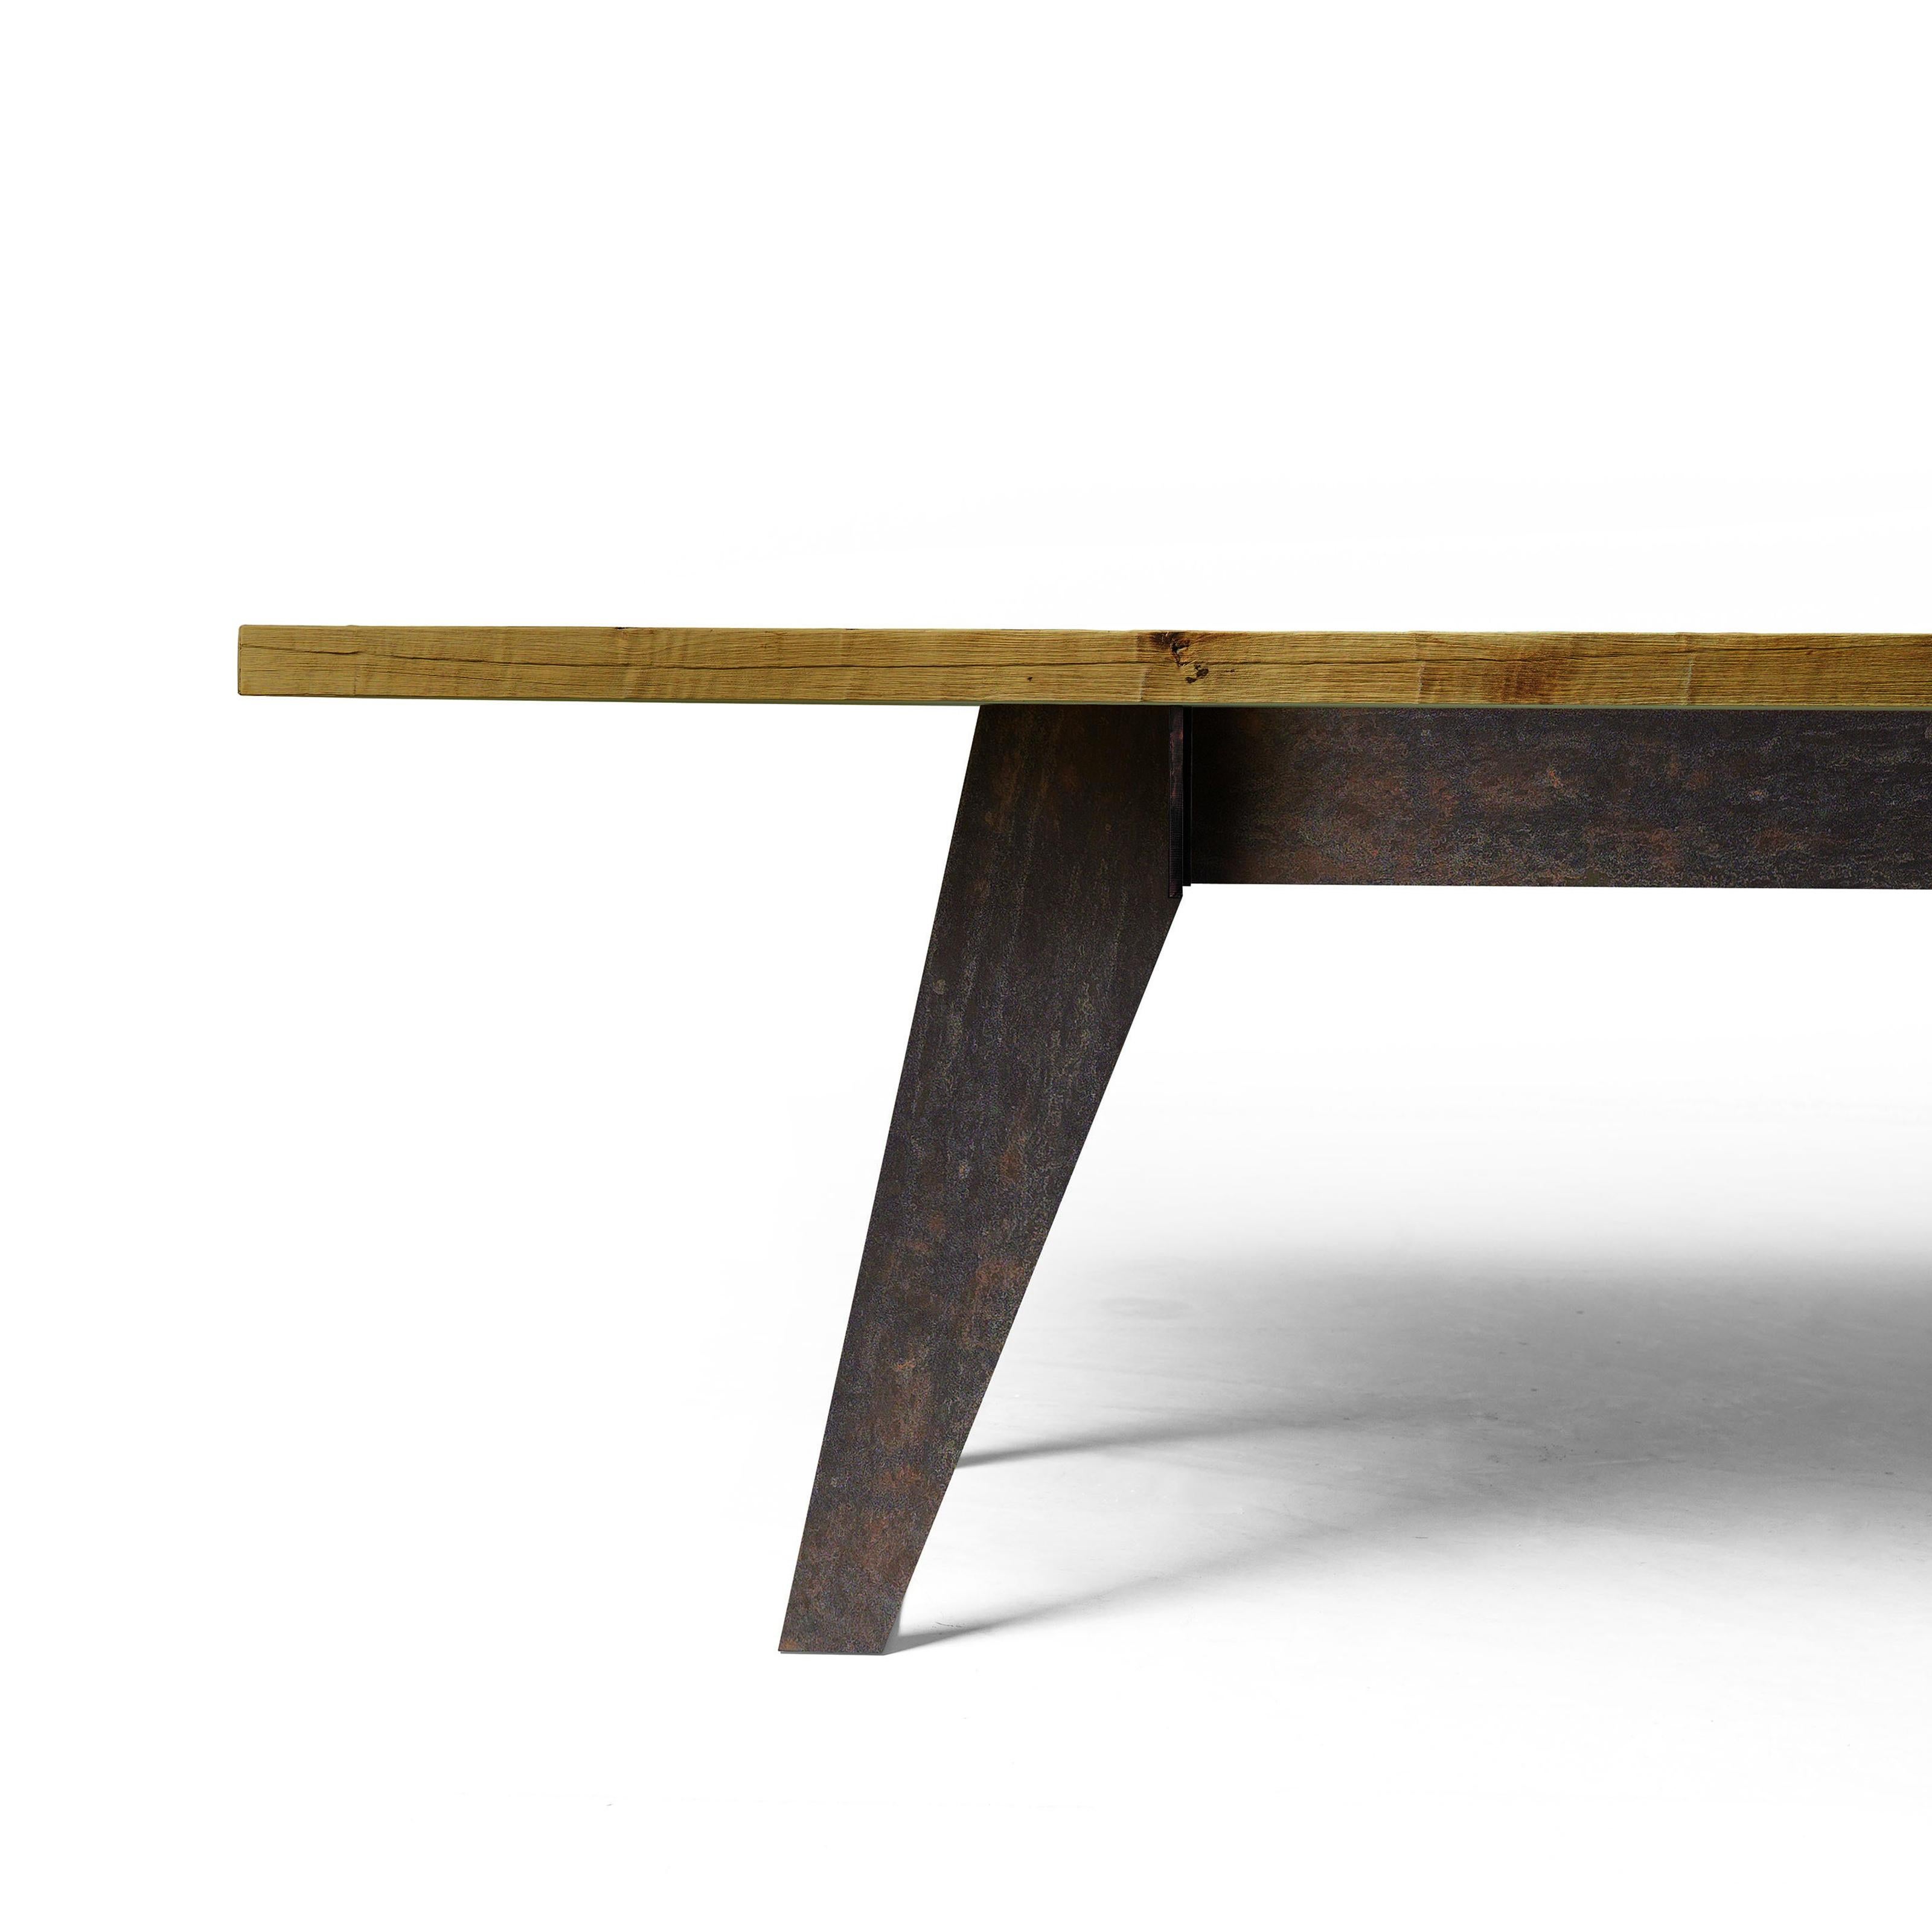 Italian Misura Solid Wood Table, Antique Oak in Hand-Made Natural Finish, Contemporary For Sale